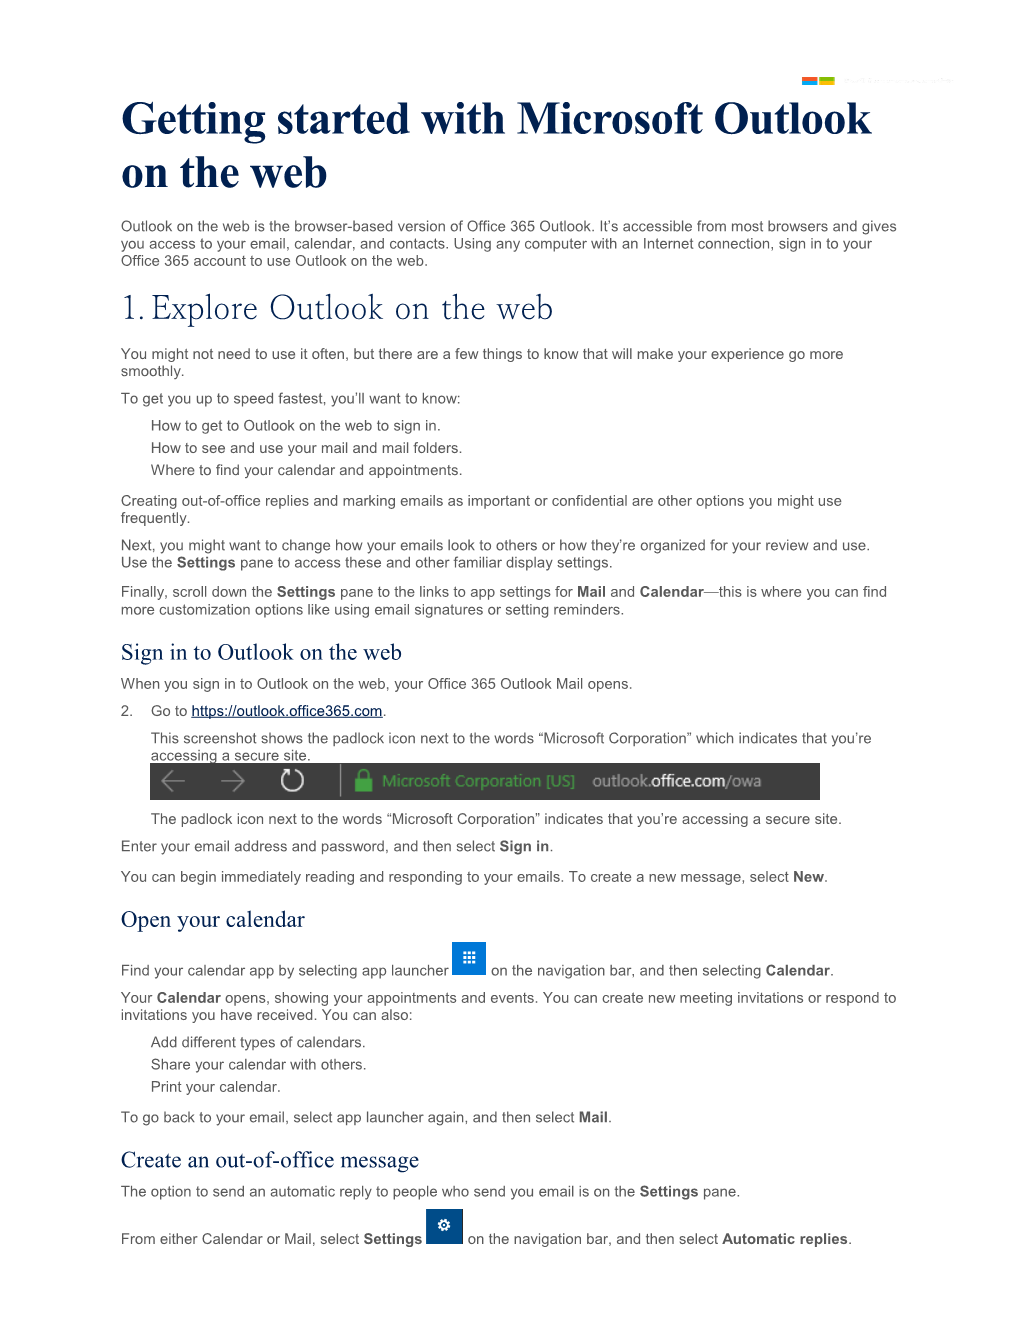 Getting Started with Microsoft Outlook on the Web